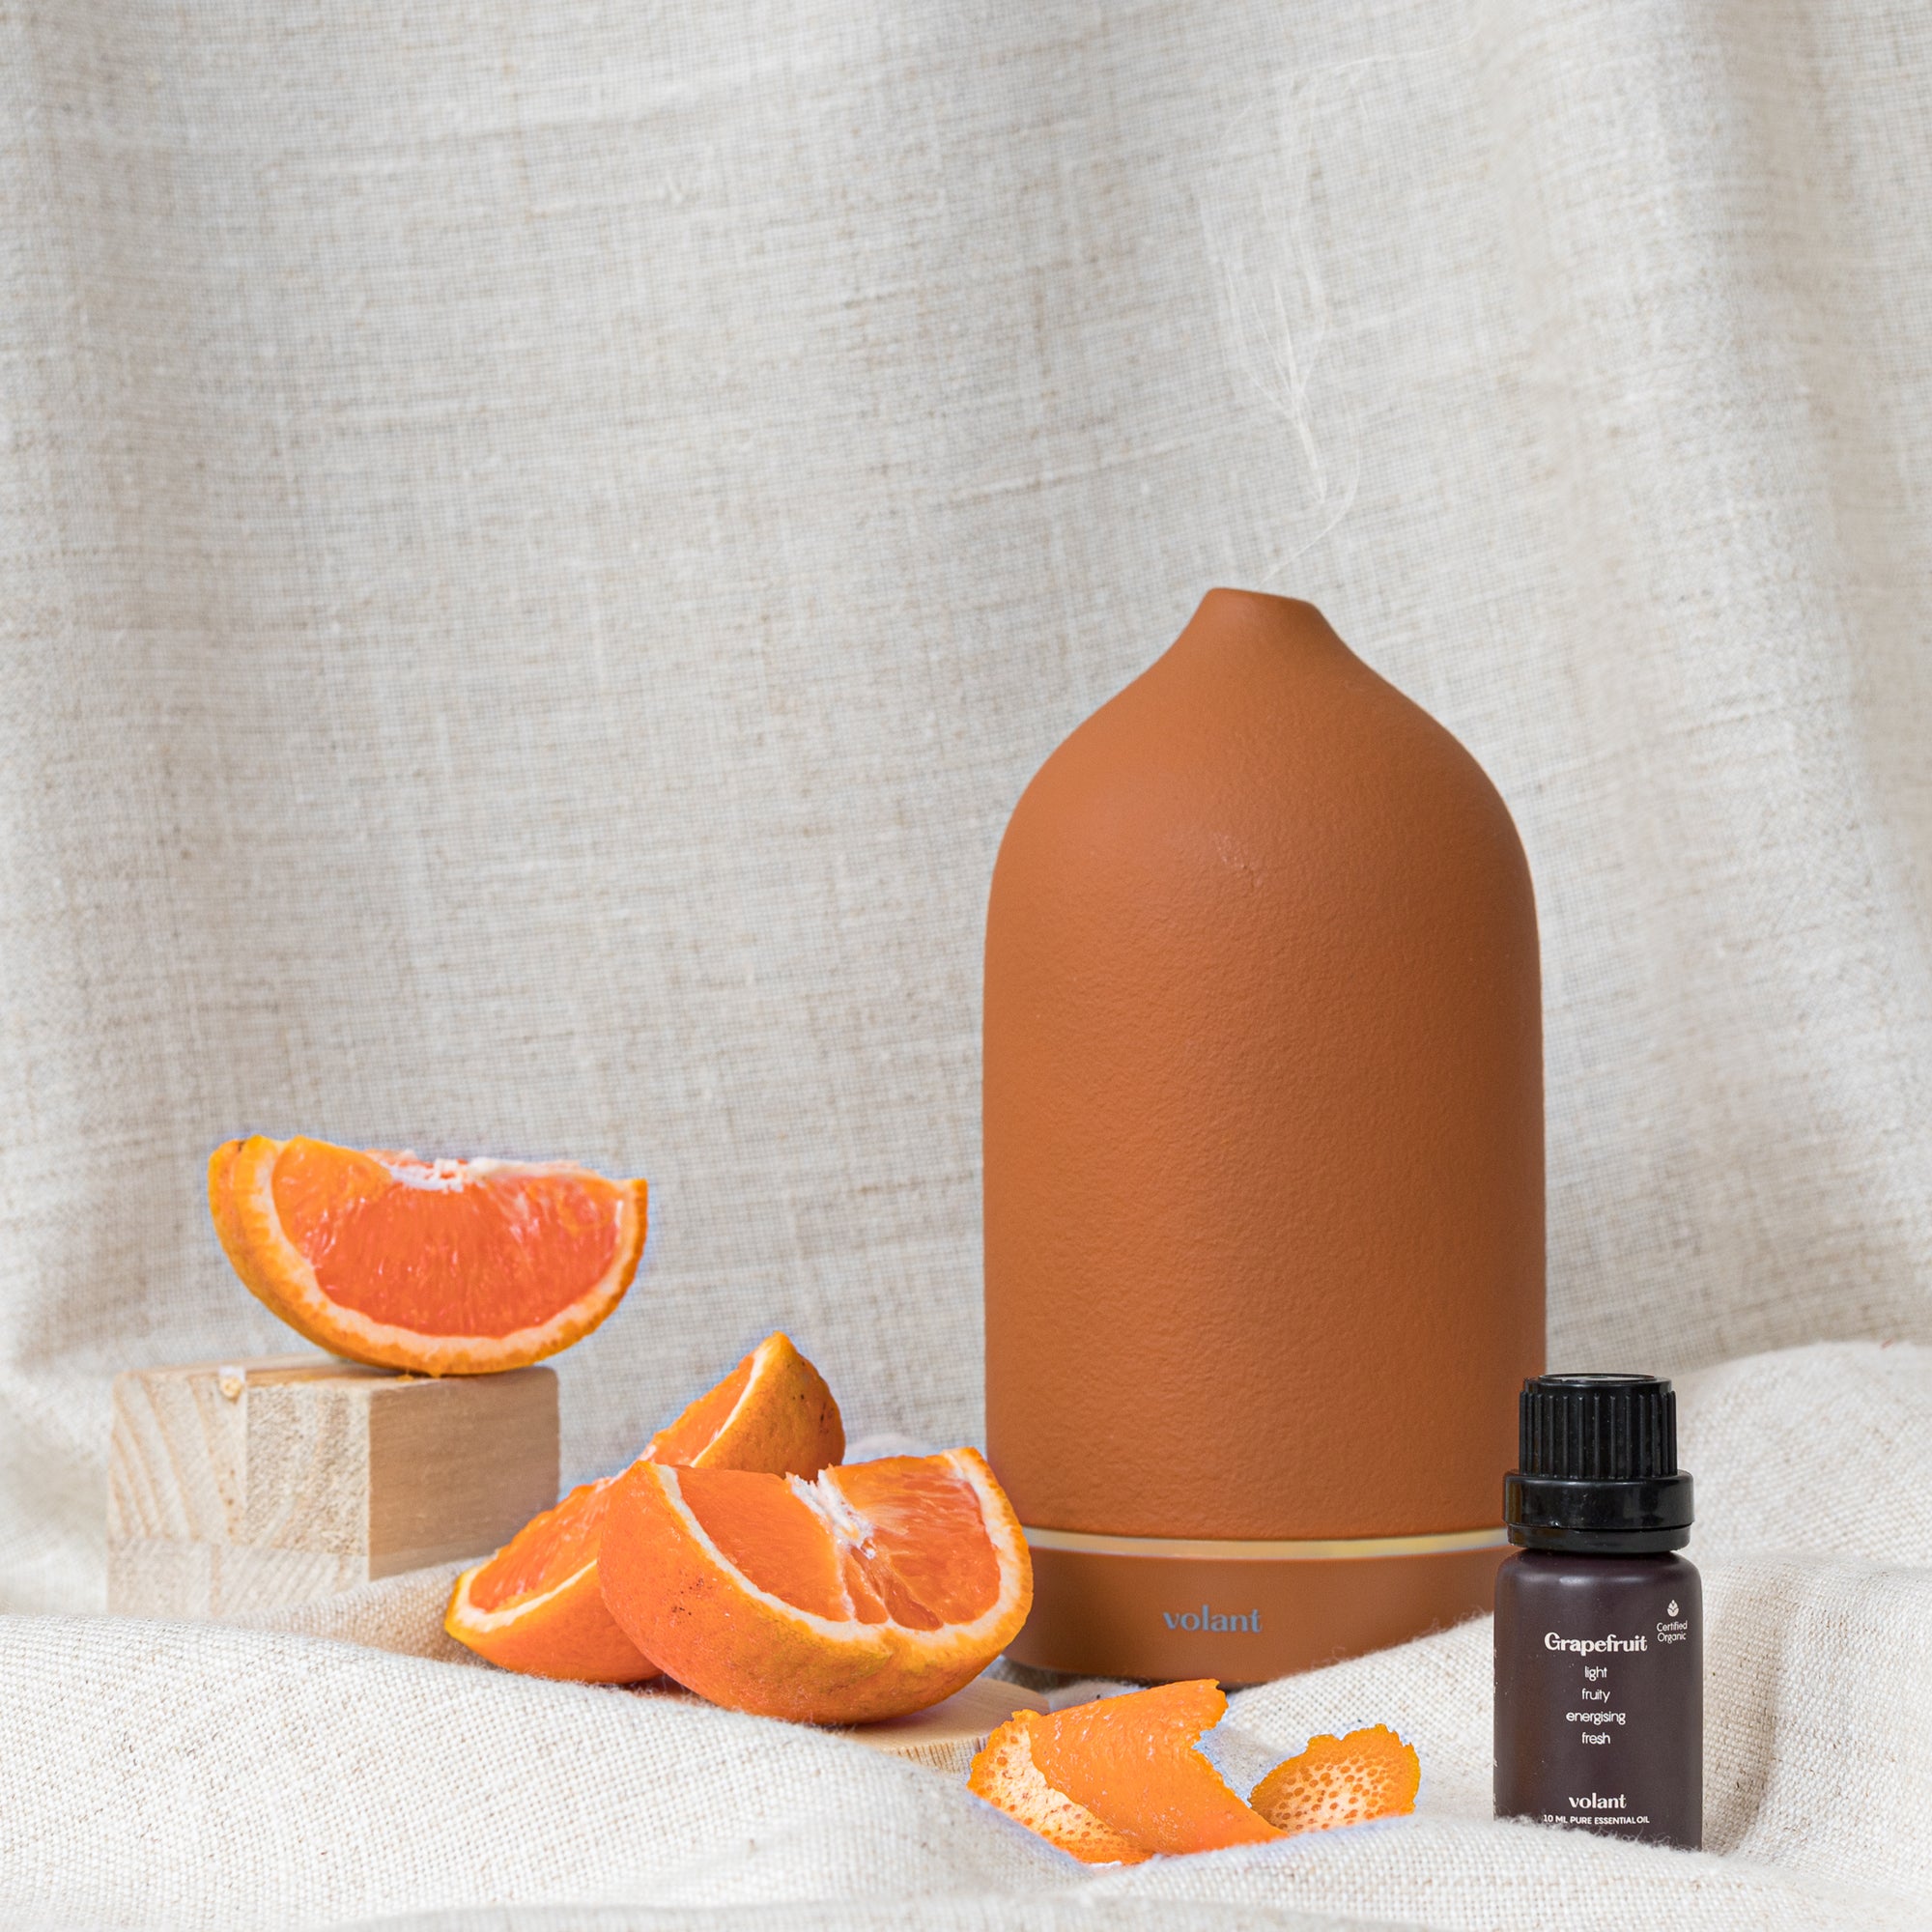 volant clay diffuser using organic grapefruit essential oil to relieve stress